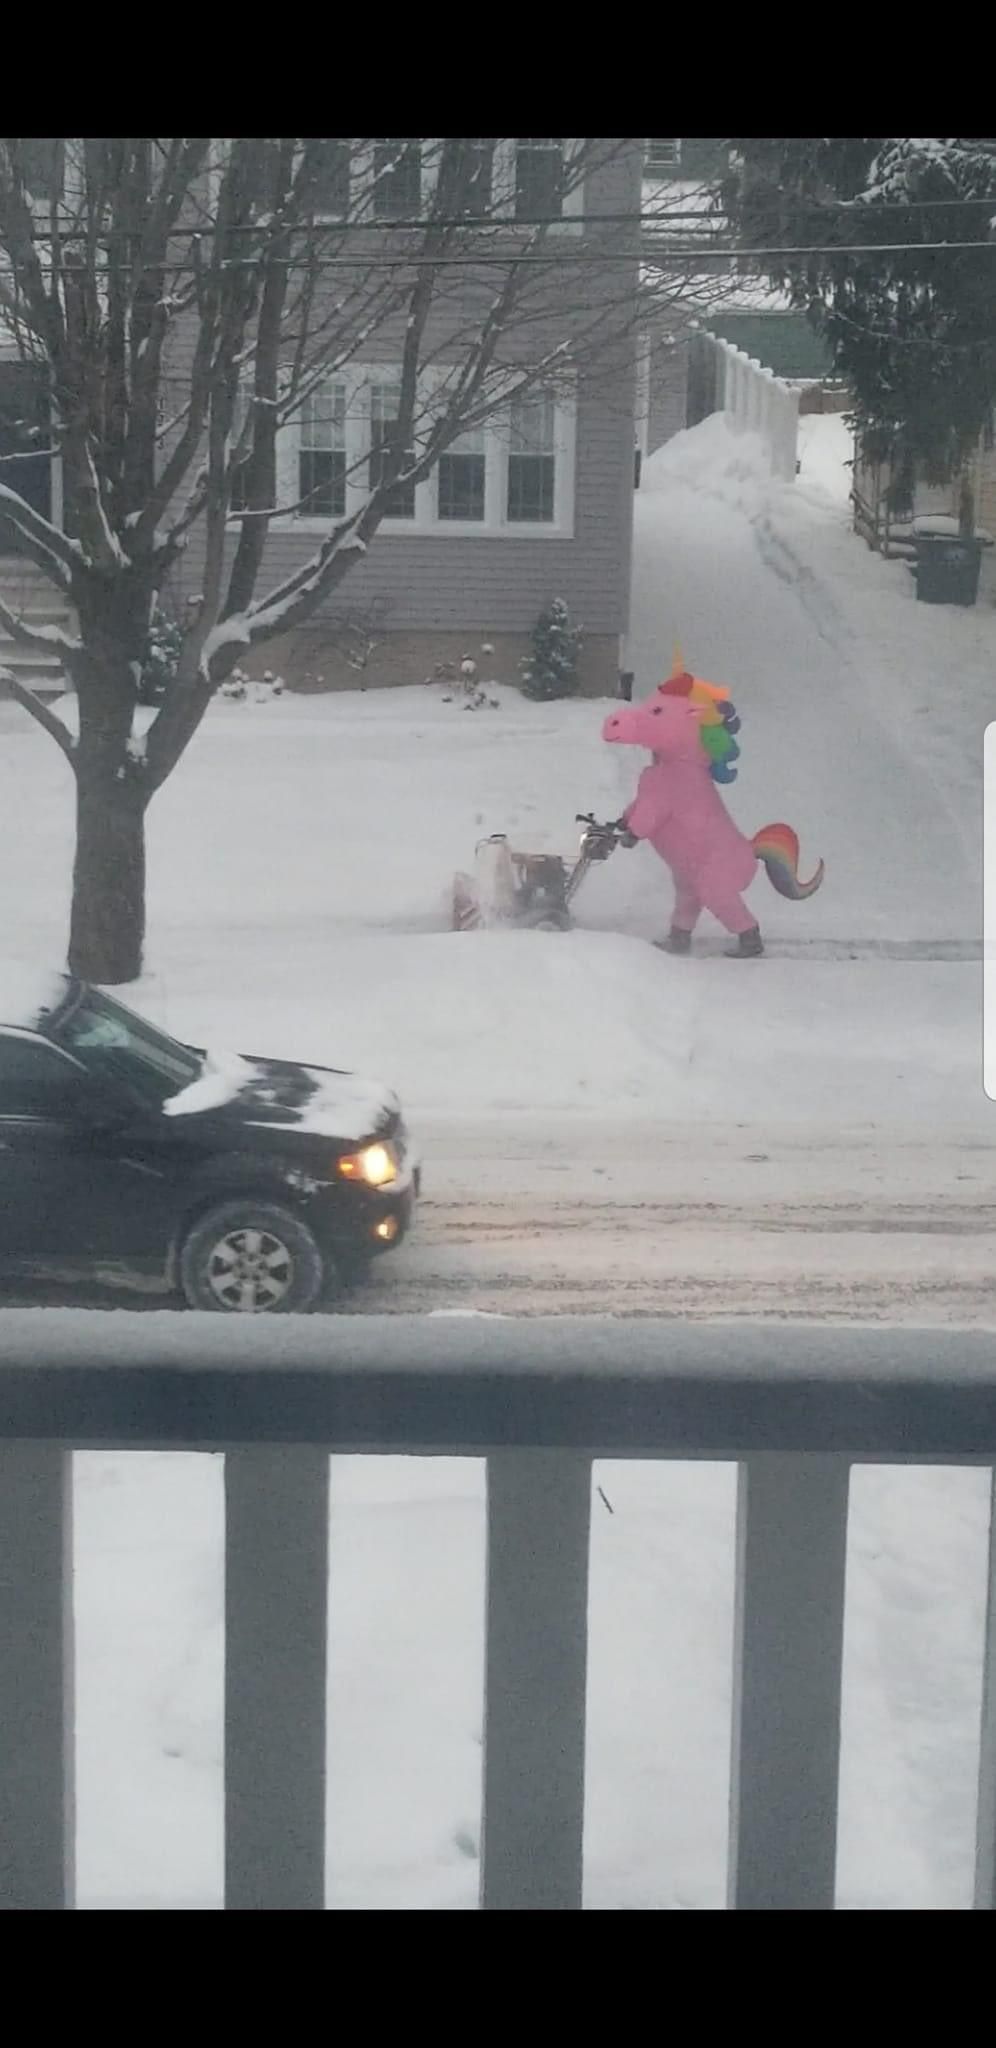 Someone in the neighborhood dons a unicorn costume while snow blowing and this is the kind of community I want.